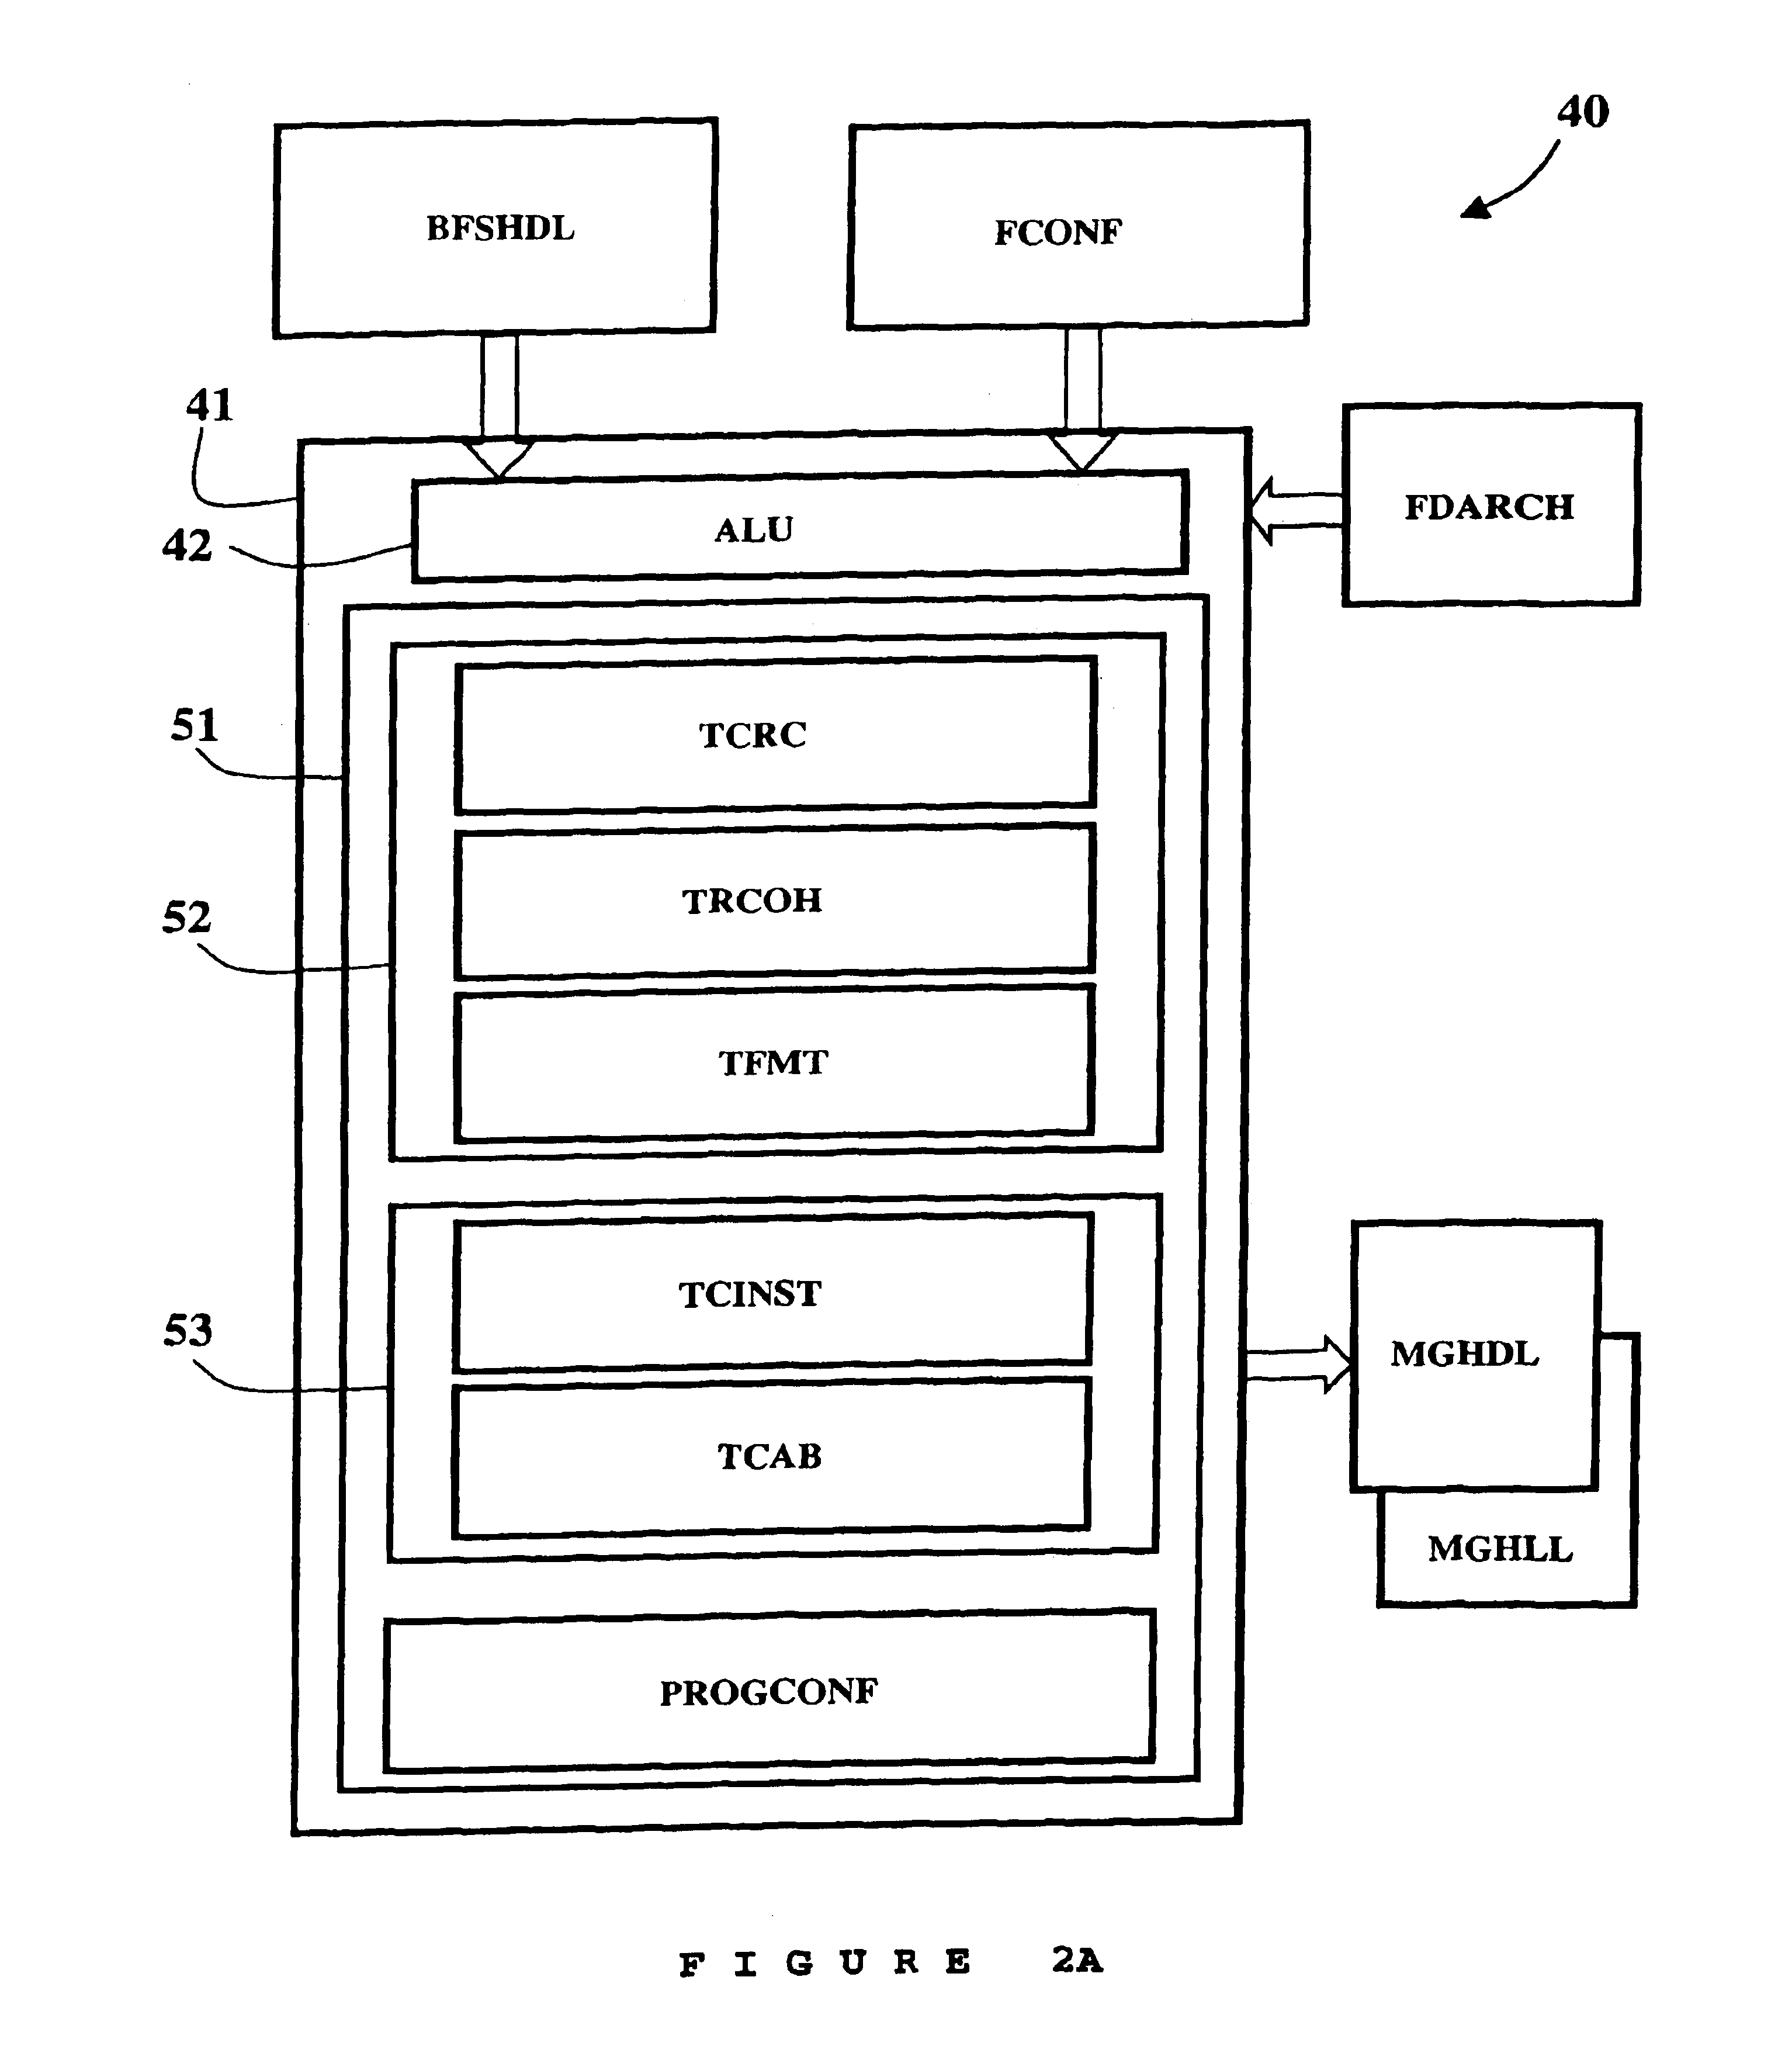 Method and system for automatically generating a global simulation model of an architecture